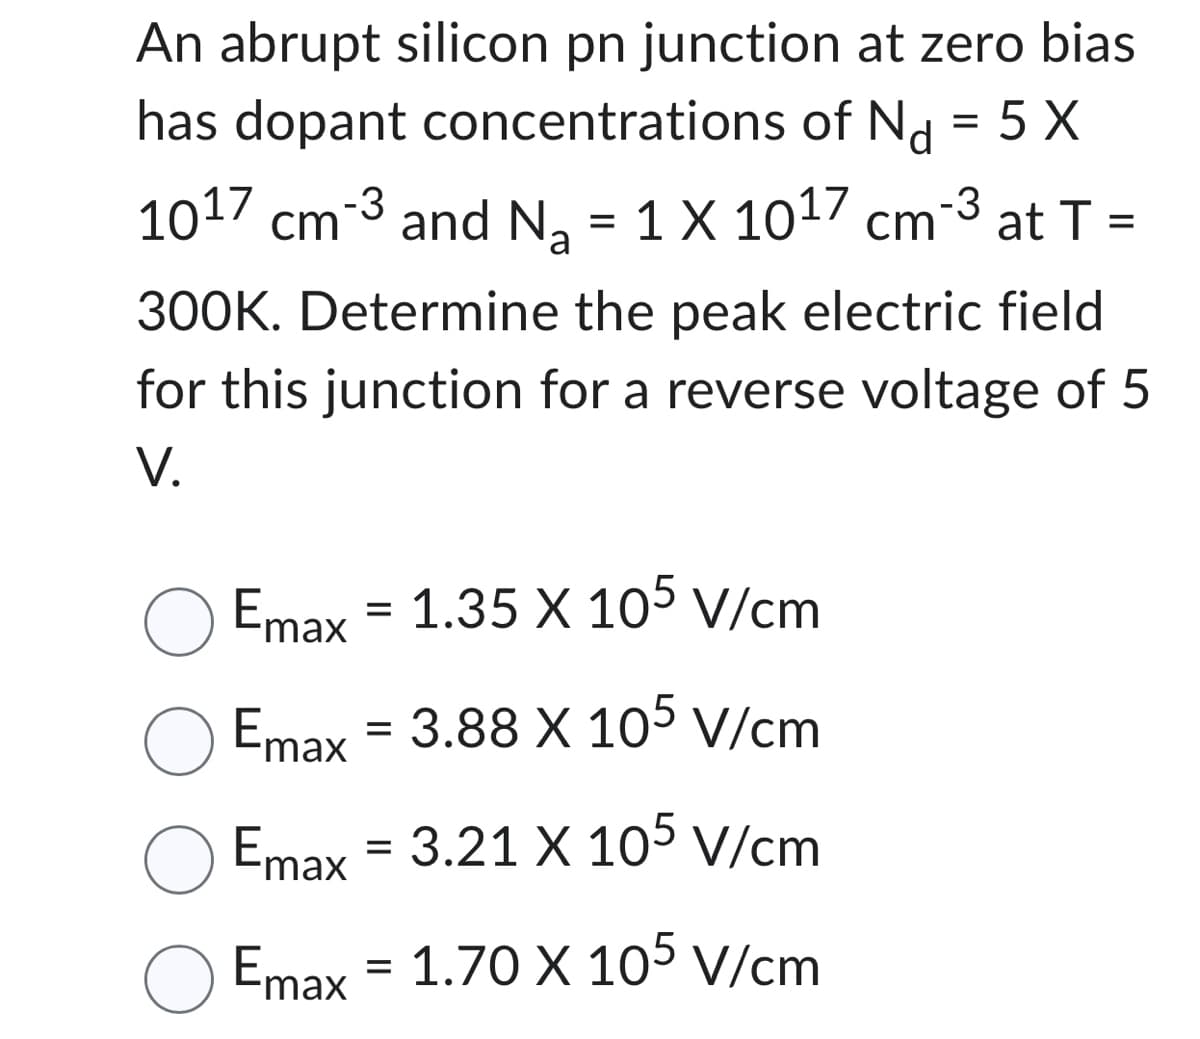 An abrupt silicon pn junction at zero bias
has dopant concentrations of Nd = 5 X
1017 cm 3 and N₂ = 1 X 1017 cm-3 at T =
a
300K. Determine the peak electric field
for this junction for a reverse voltage of 5
V.
Emax
=
O Emax
O Emax
3.88 X 105 V/cm
Emax
3.21 X 105 V/cm
Emax = 1.70 X 105 V/cm
1.35 X 105 V/cm
=